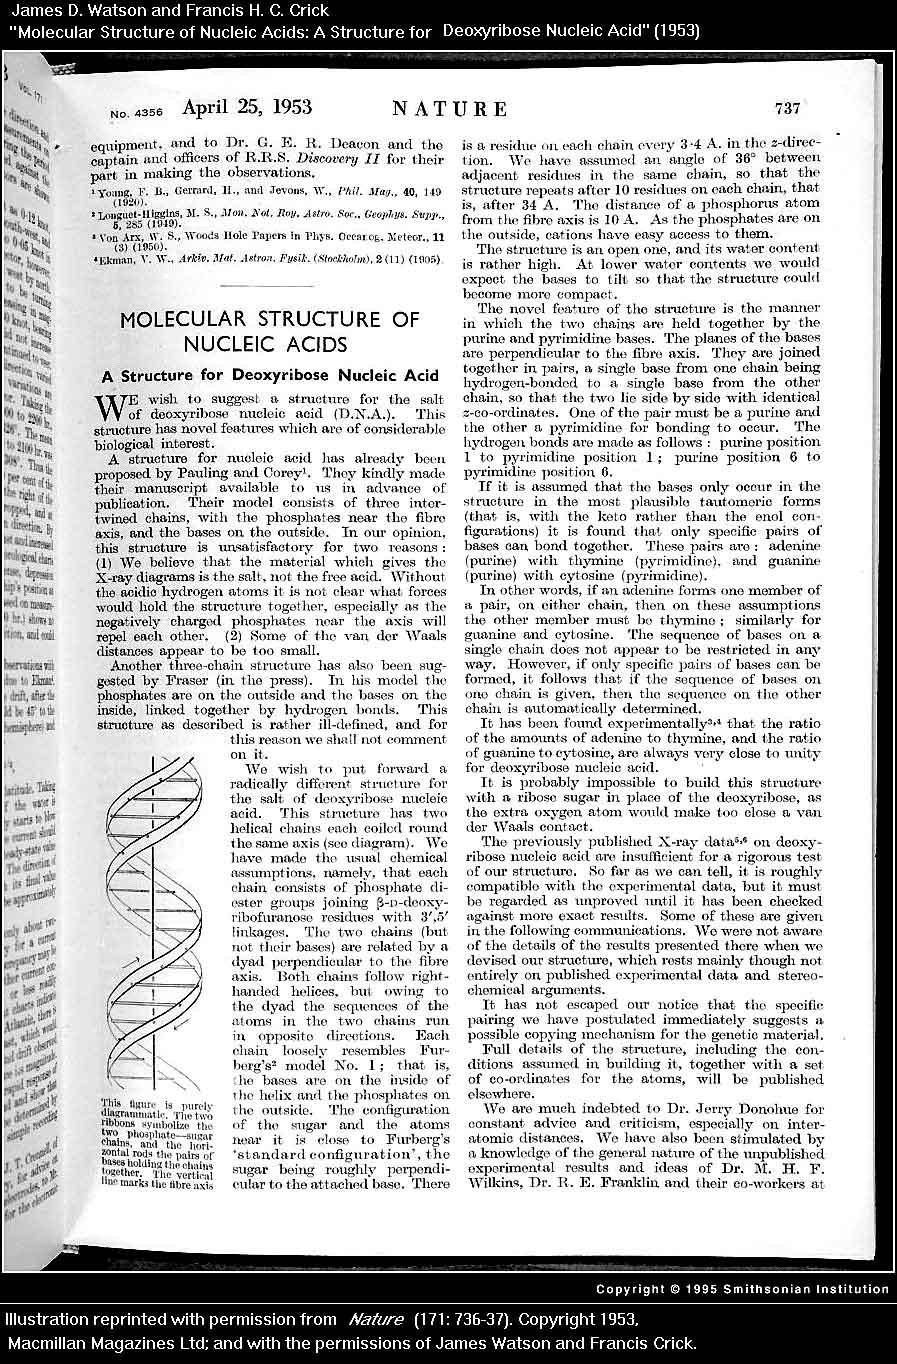 Nobel Prize in Physiology or Medicine (1962) -Crick, Watson & Wilkins "for their discoveries concerning